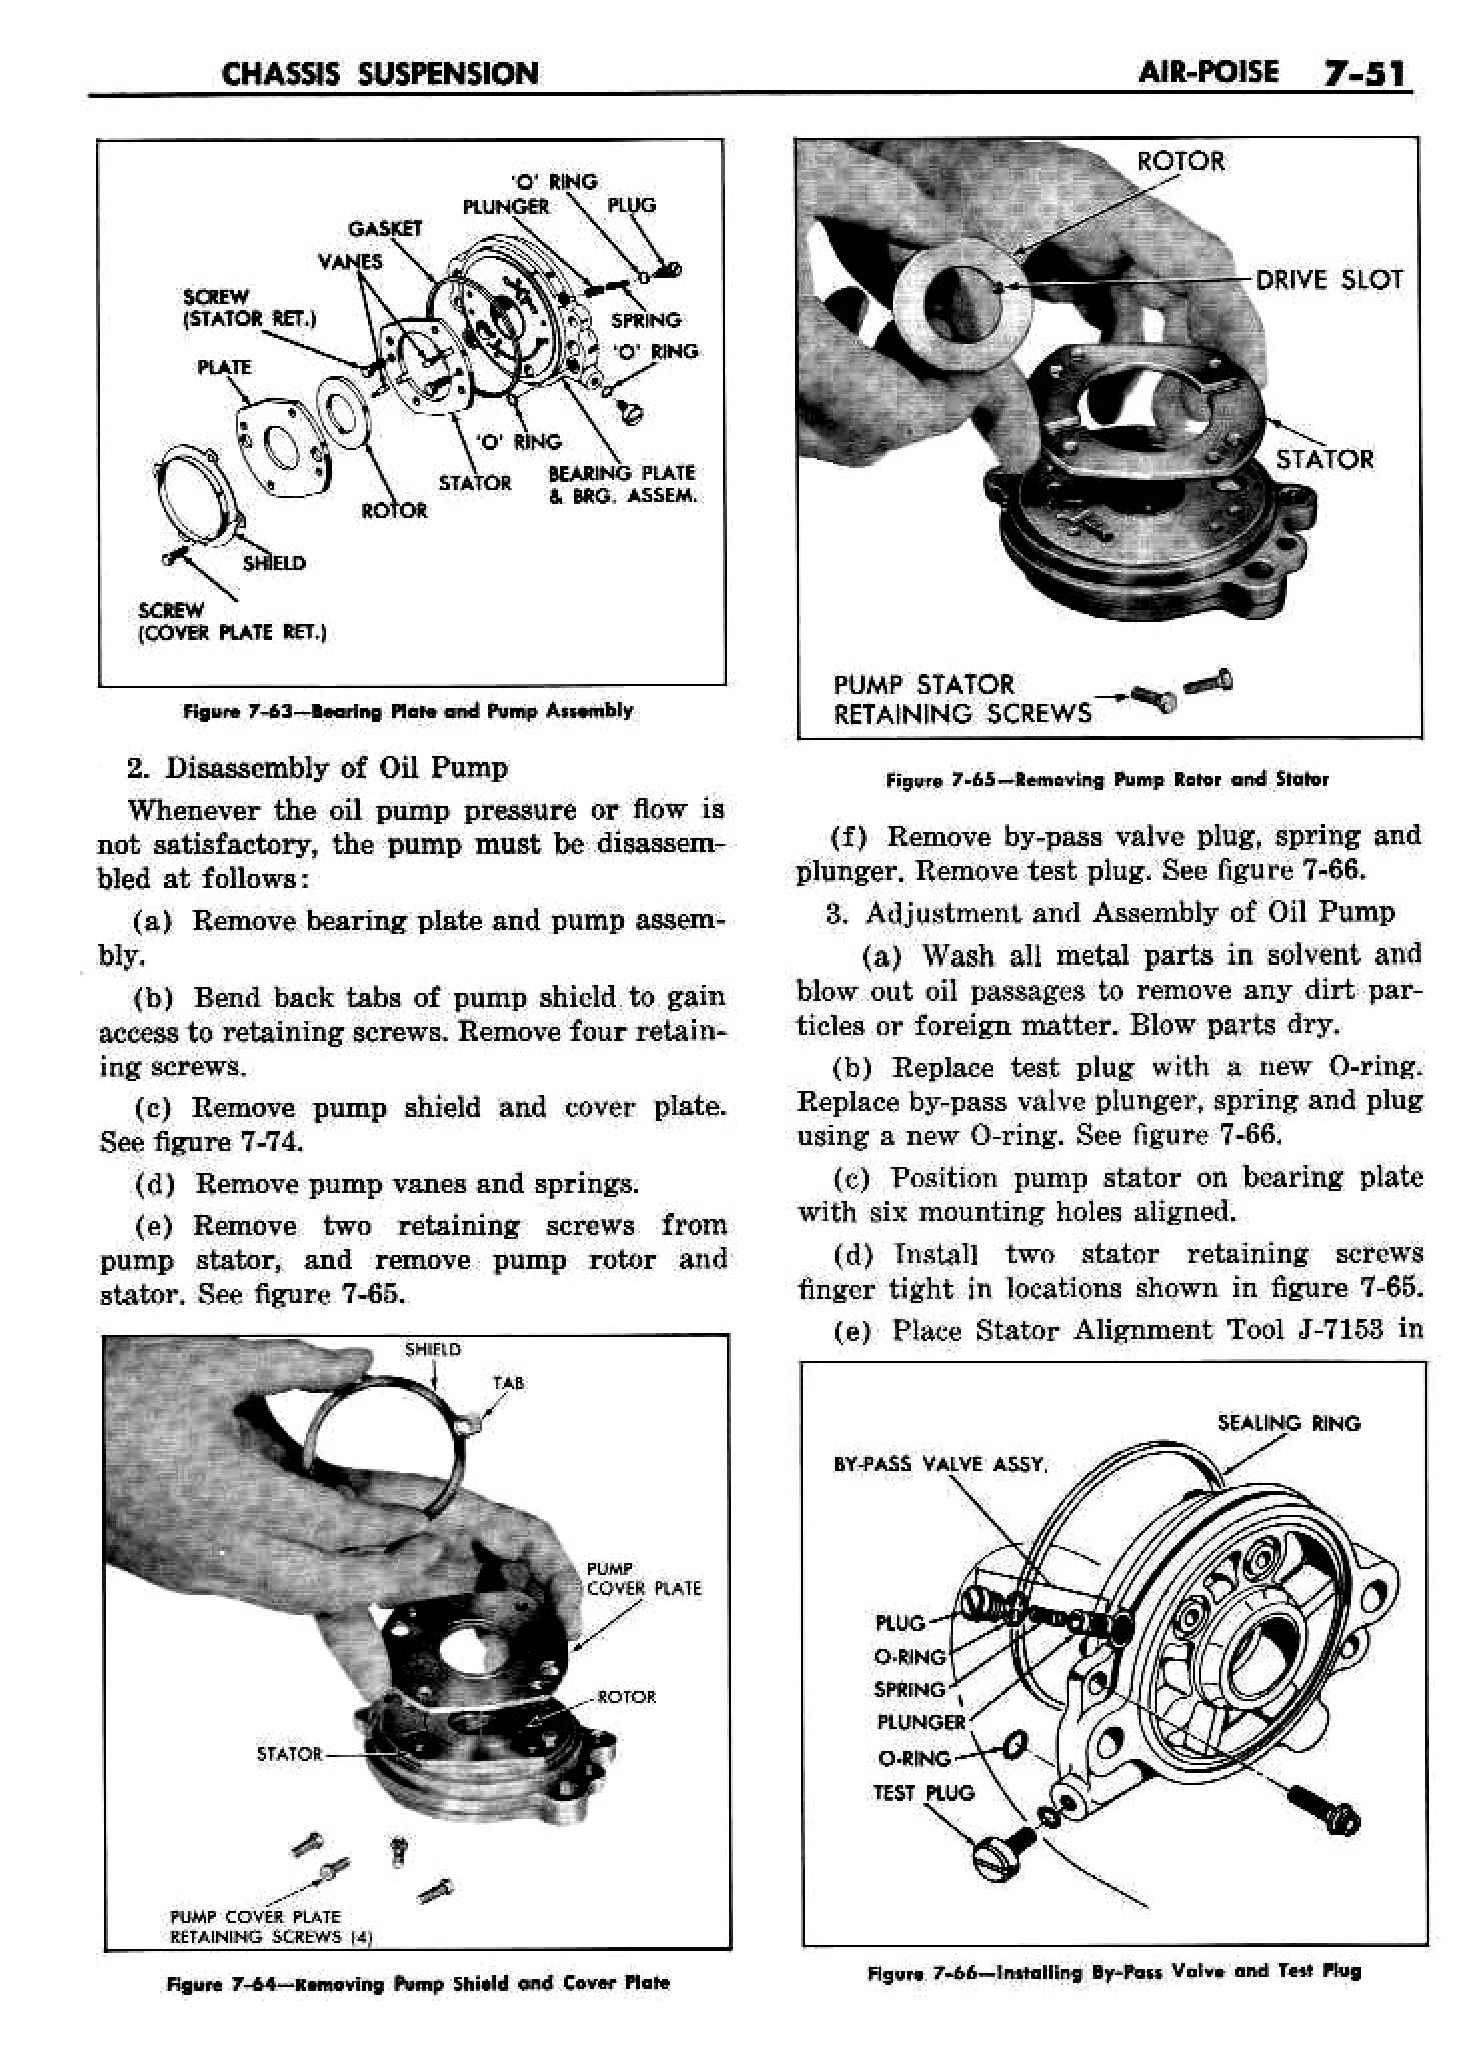 n_08 1958 Buick Shop Manual - Chassis Suspension_51.jpg